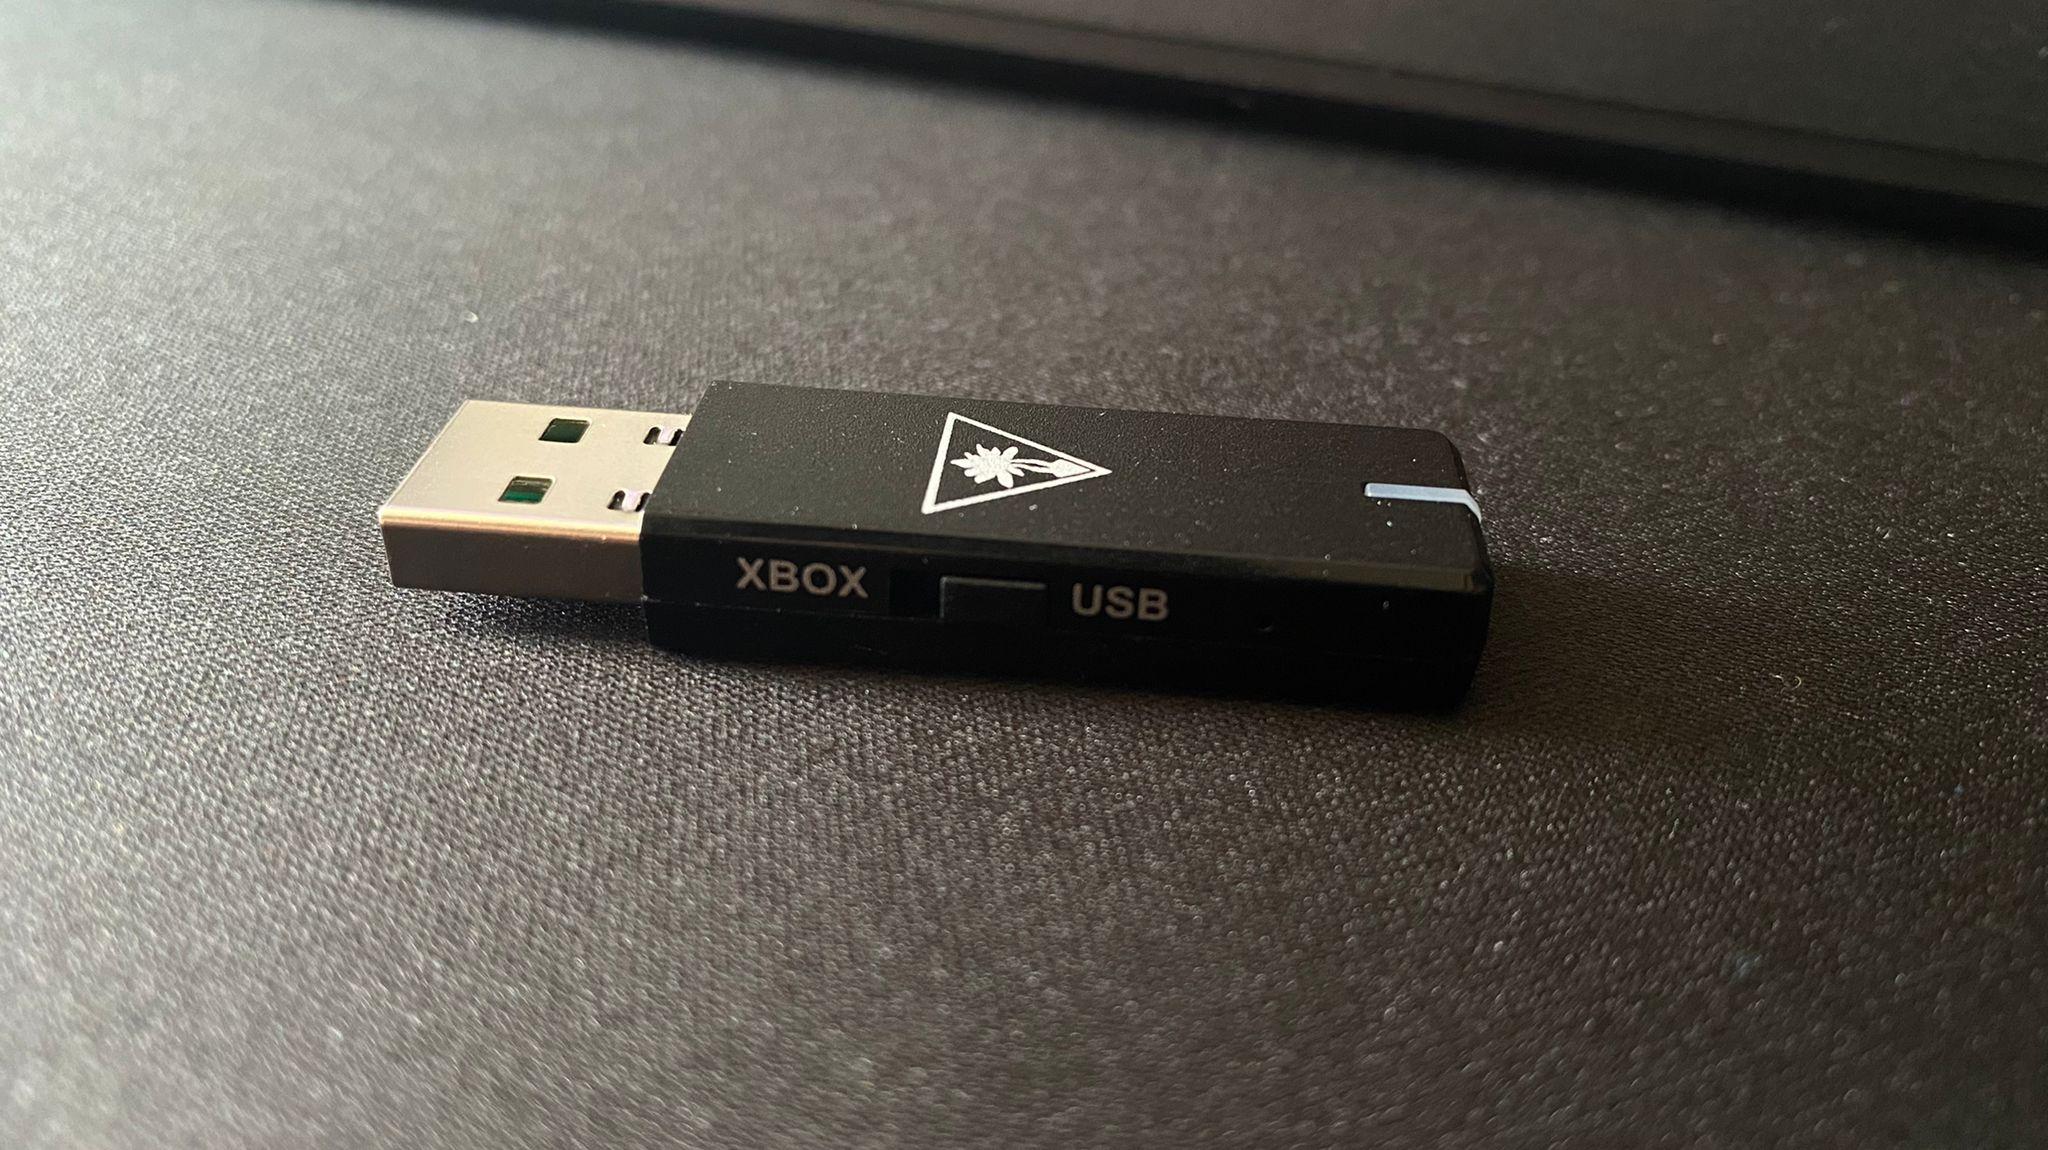 The Turtle Beach Stealth 700 Gen 2 Max USB dongle, highlighting the switches